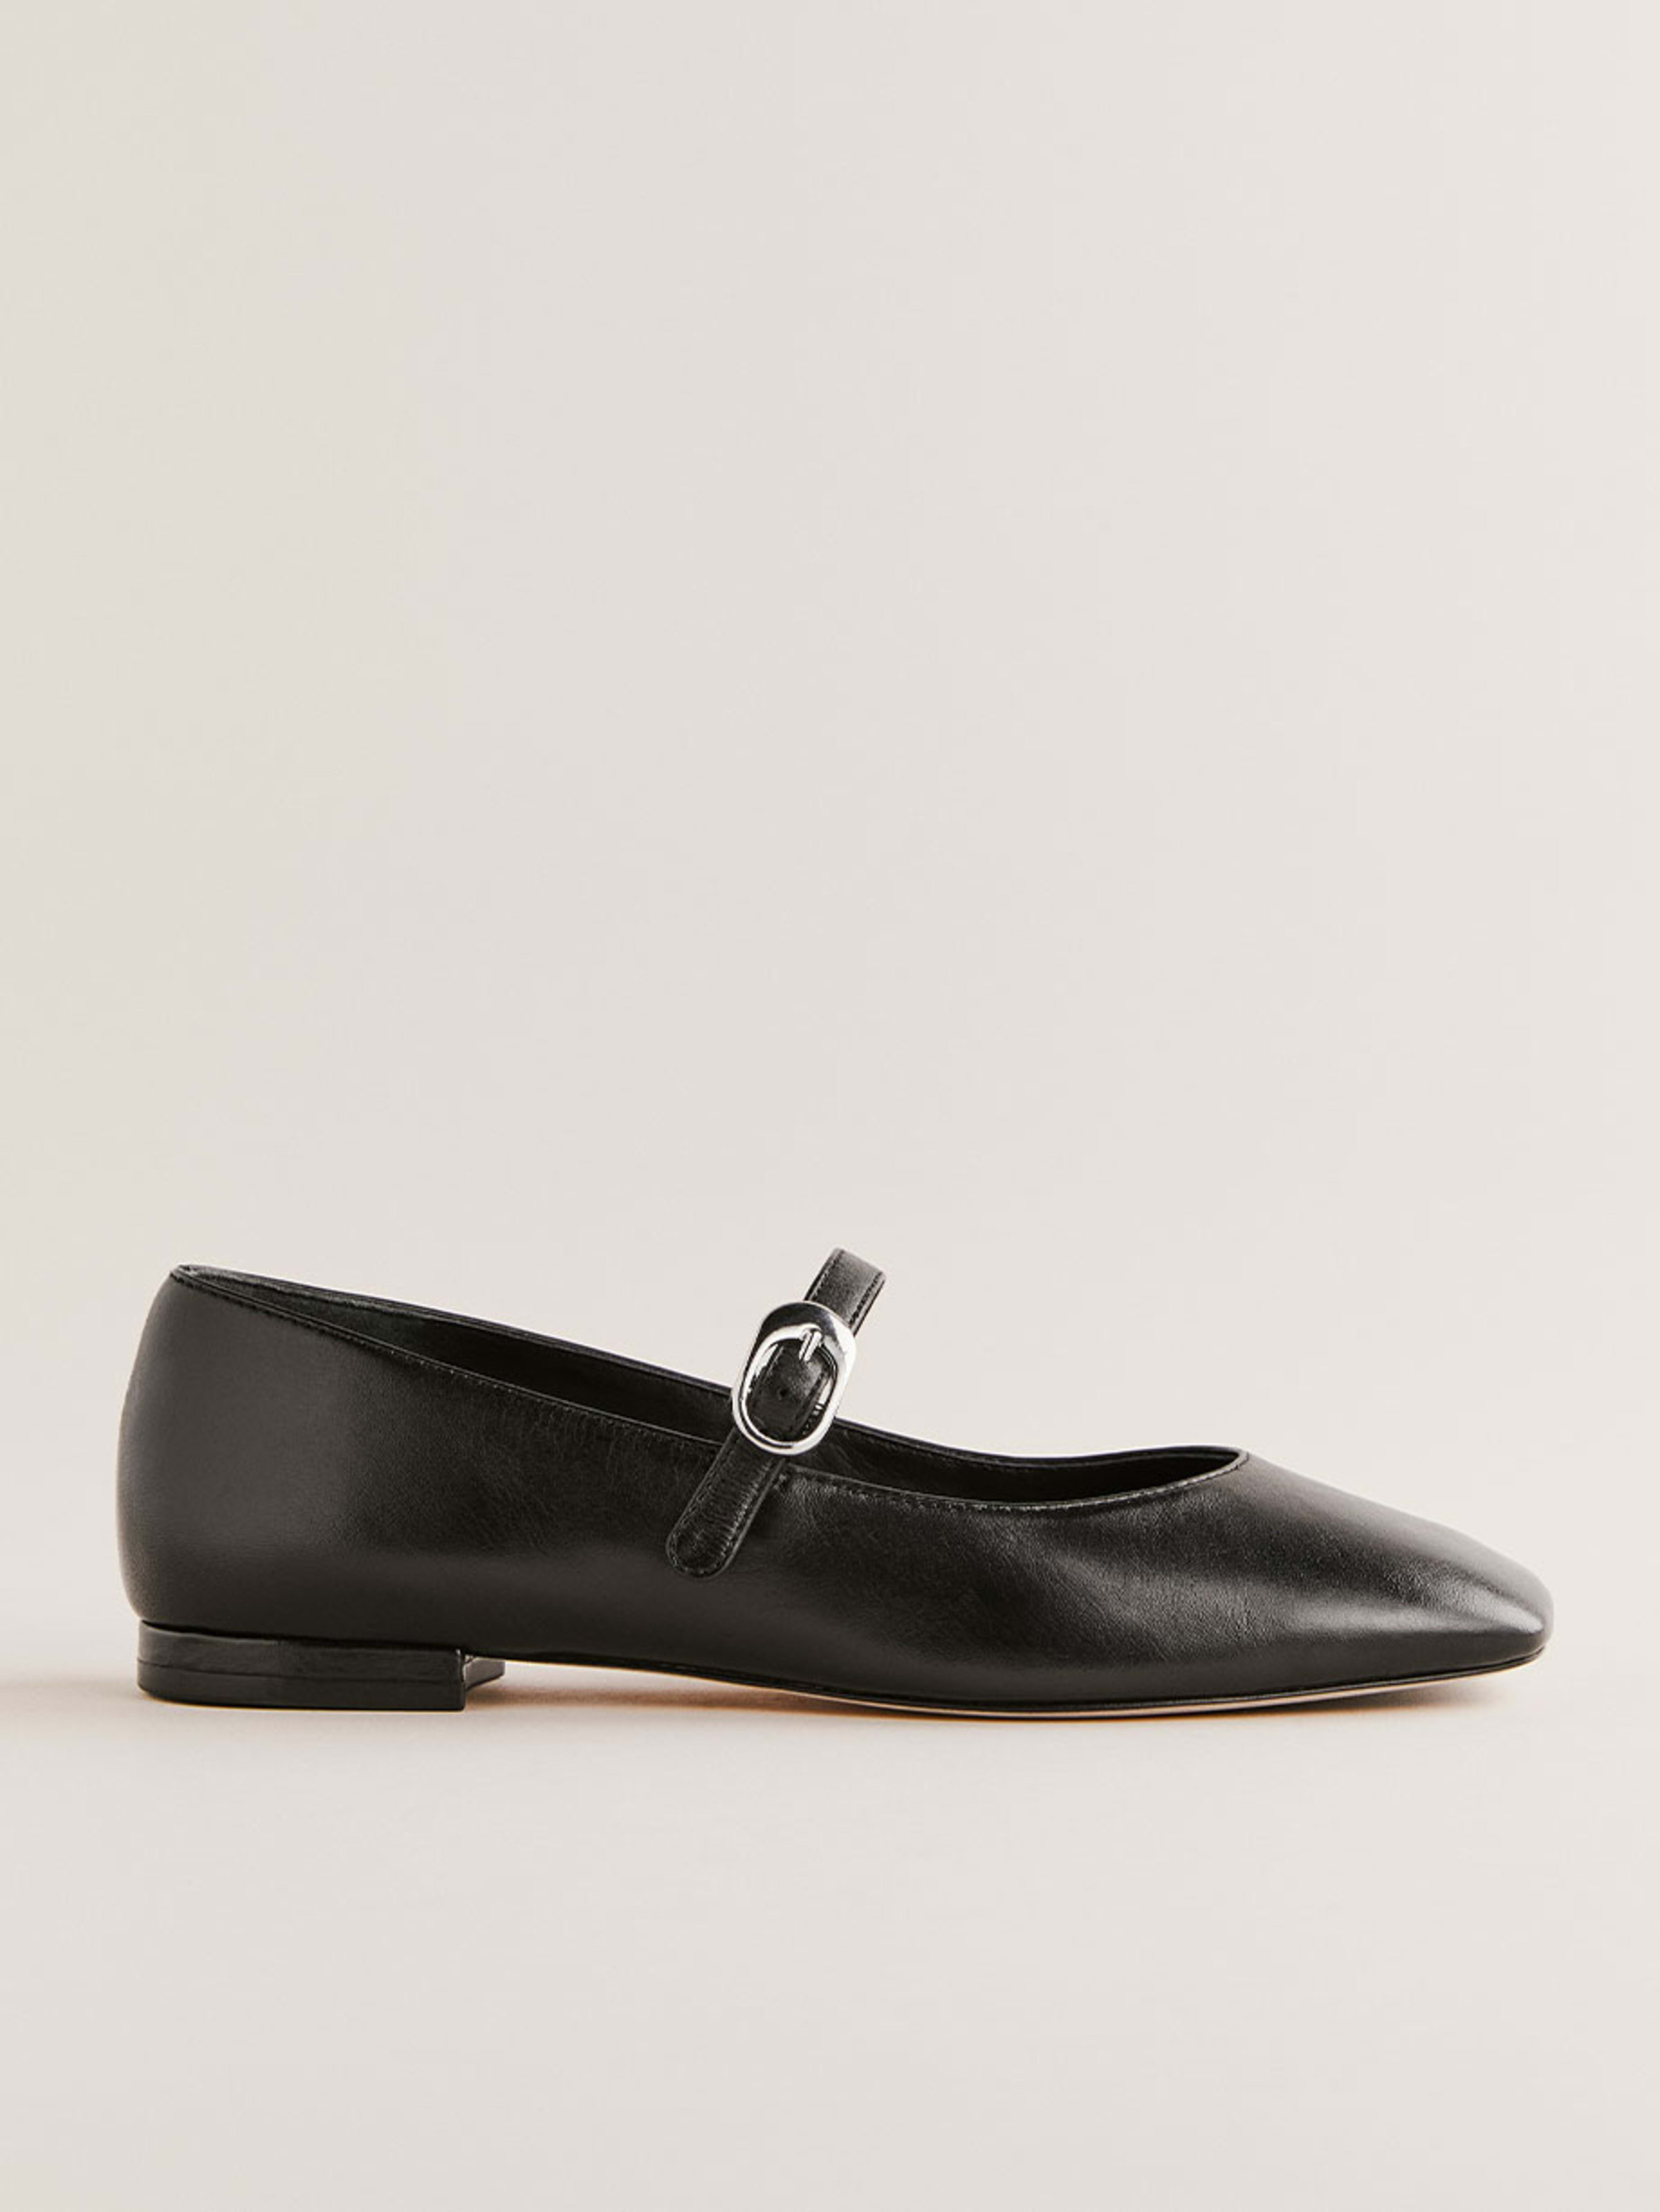 Black Mary Jane Flats by Reformation